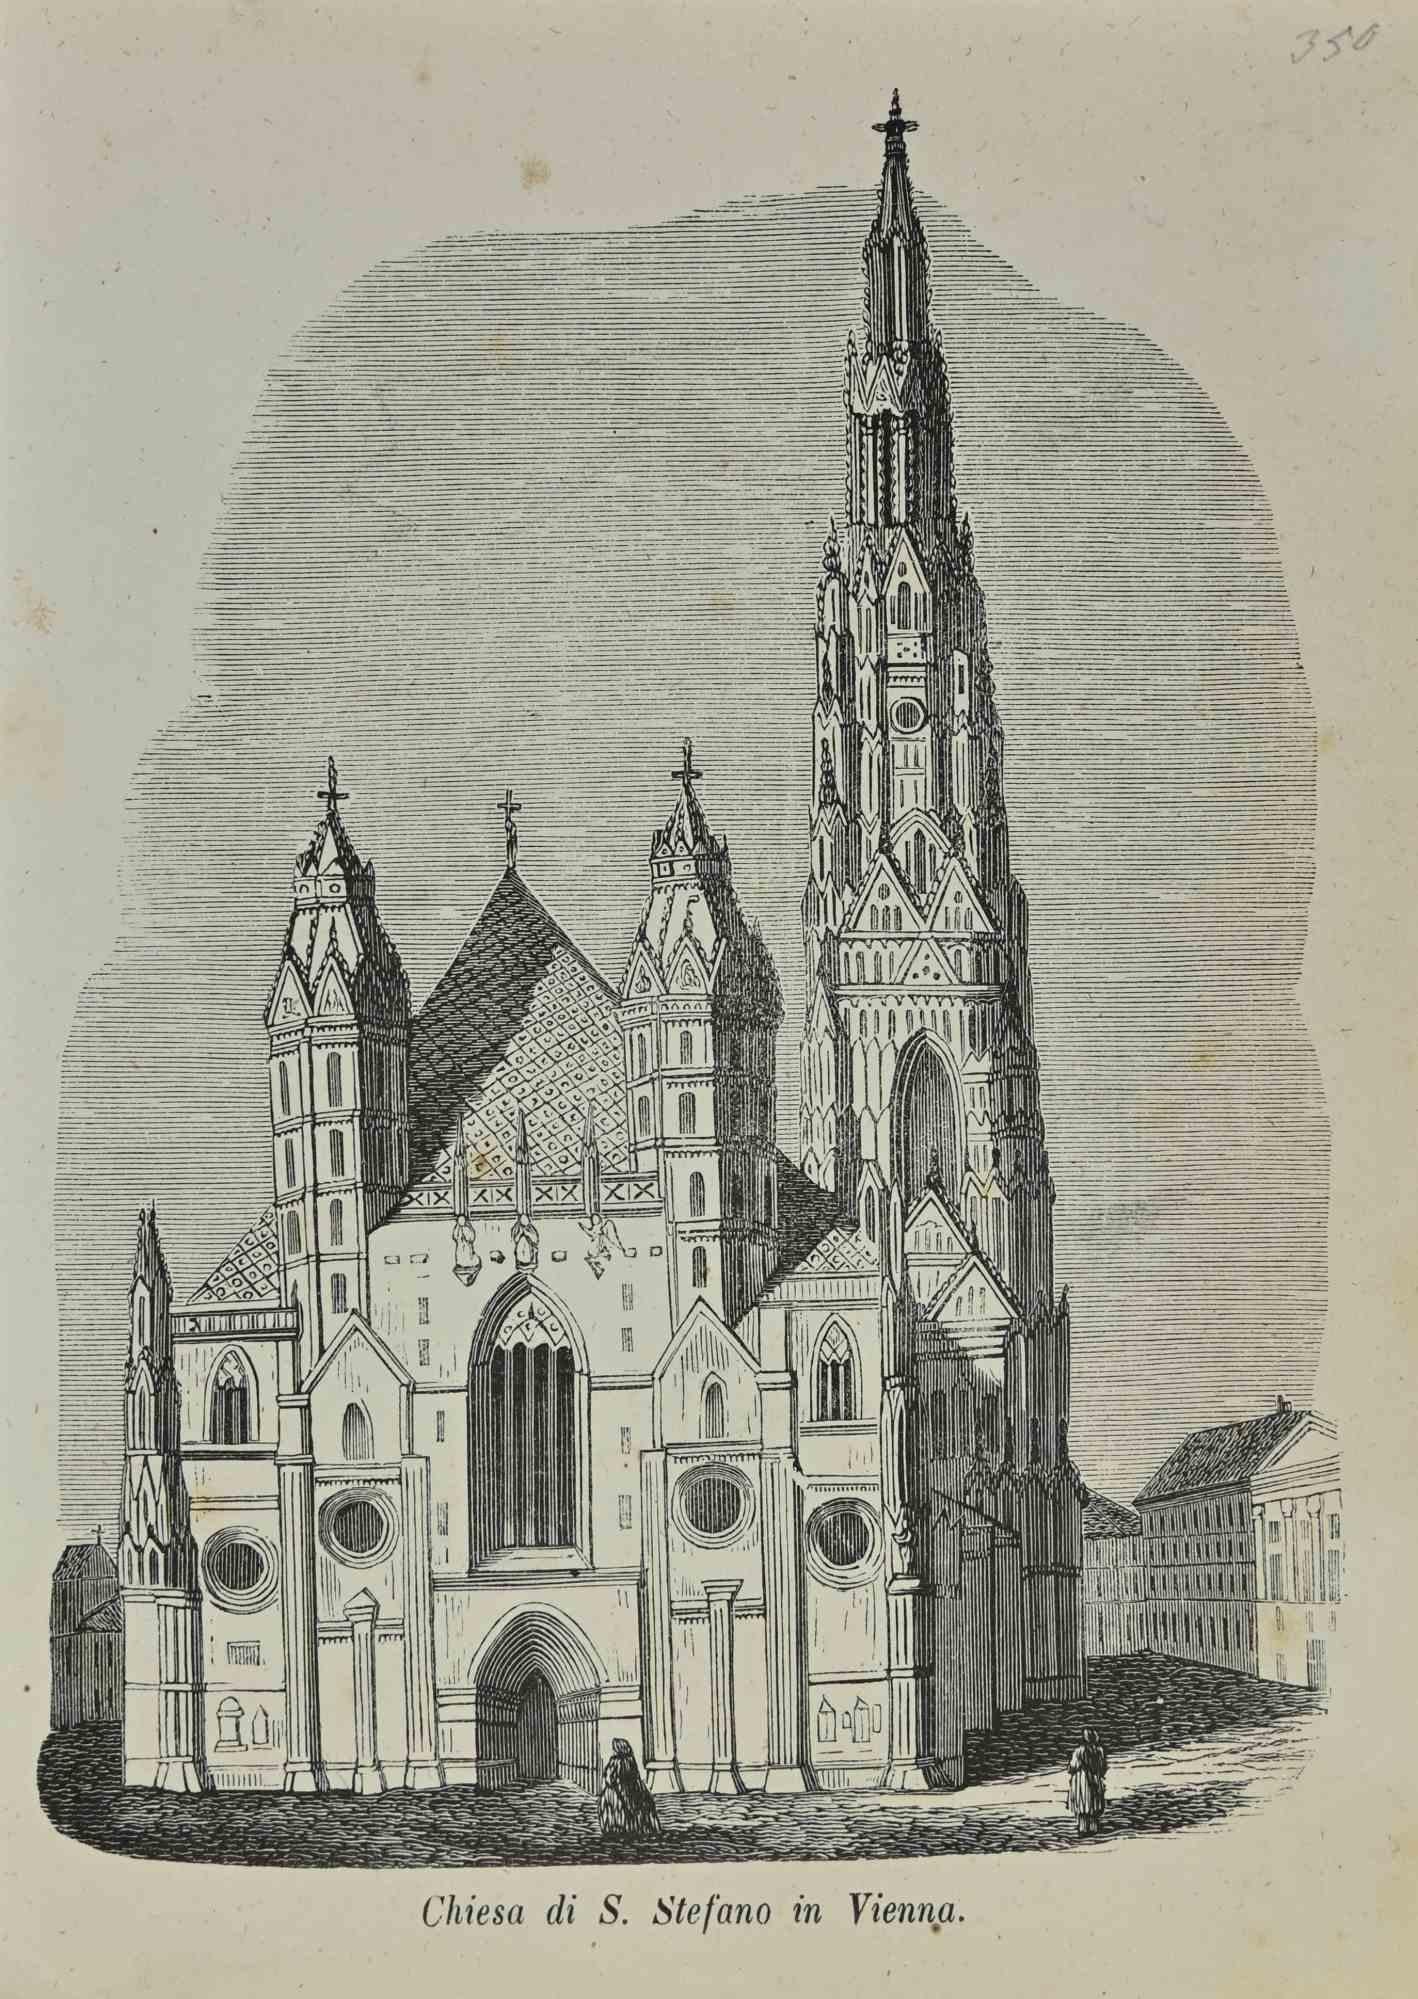 Church of St. Stephen in Vienna is a lithograph made by Auguste Wahlen in 1844.

Good condition.

Drawing in black and white.

At the center of the artwork is the original title " Chiesa di S. Stefano in Vienna".

The work is part of Suite Moeurs,